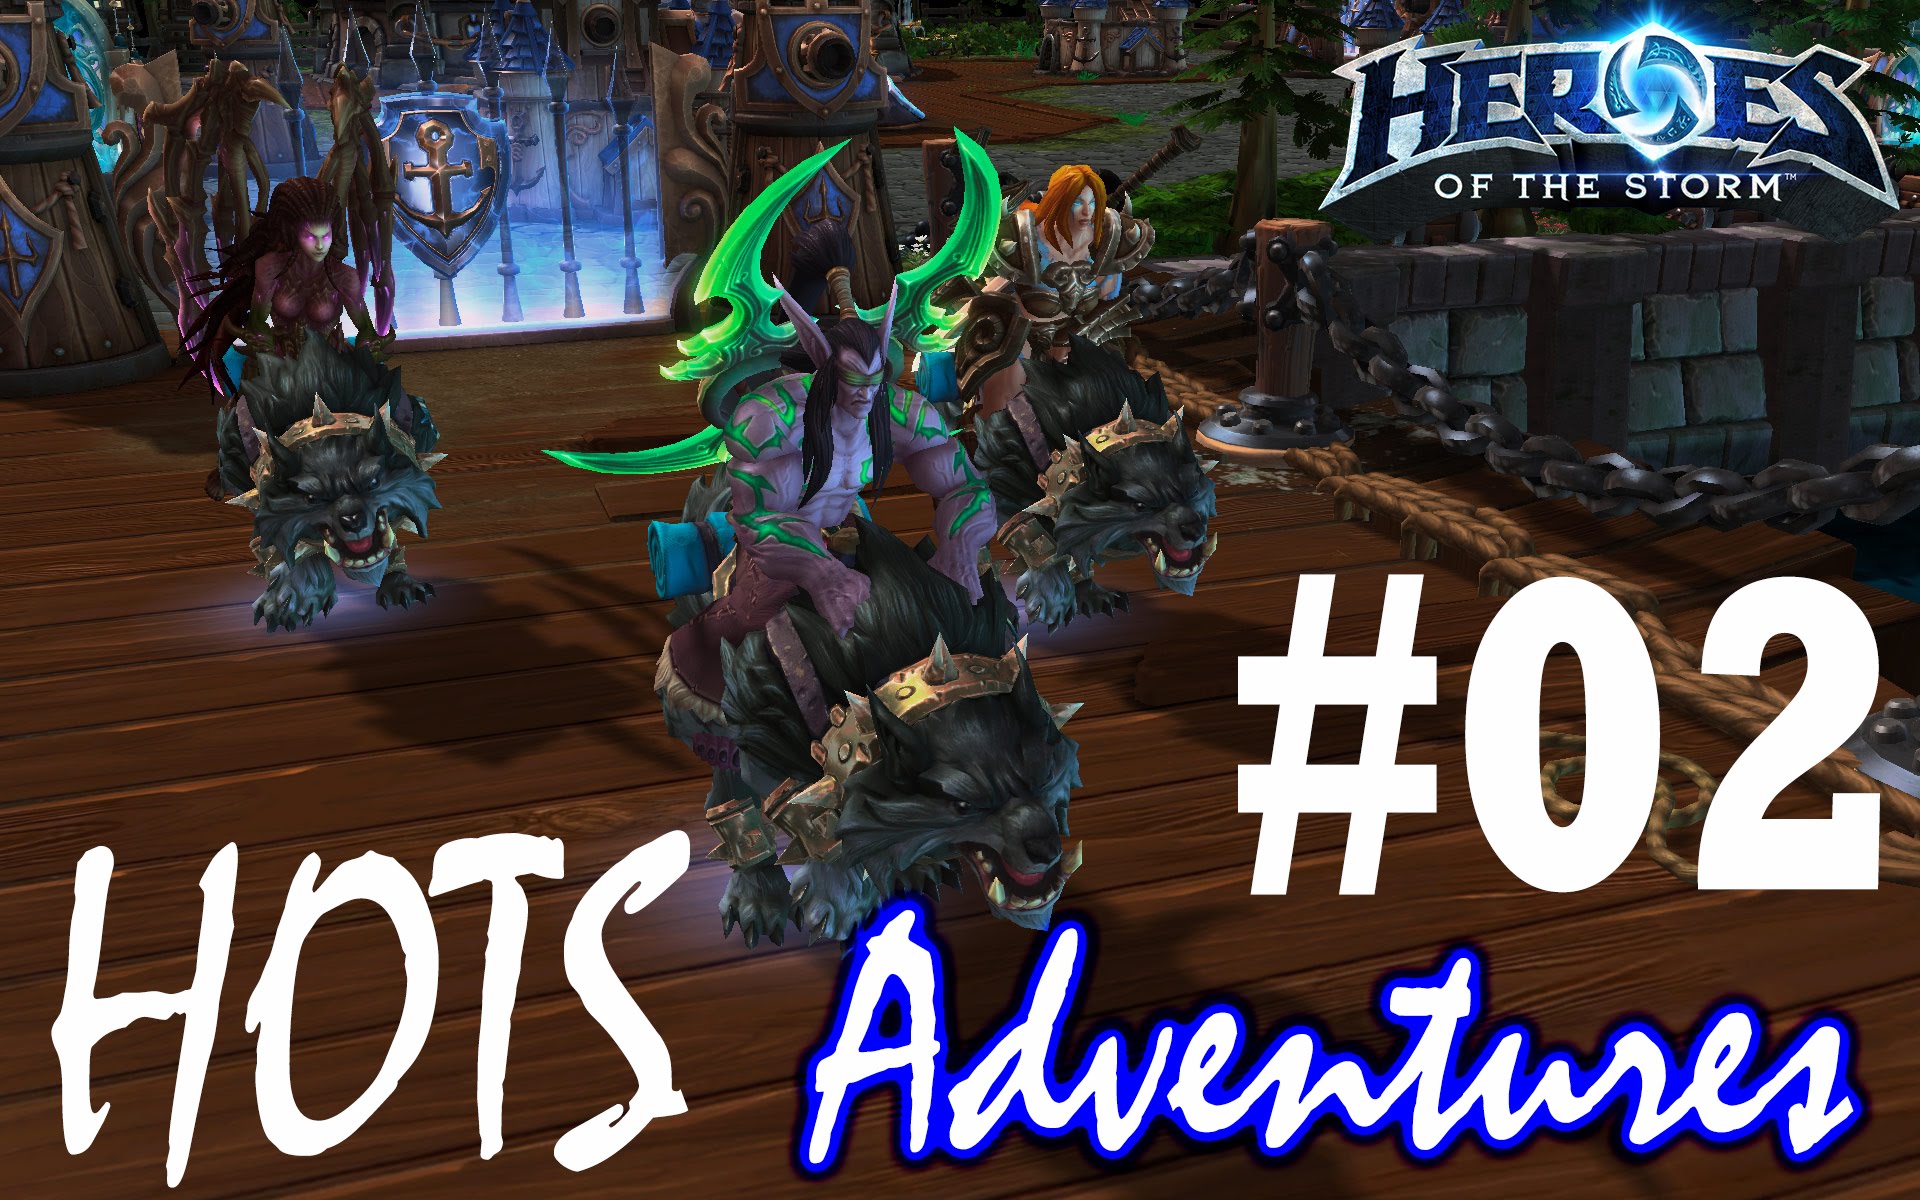 STREAM Heroes of the Storm #2 | HOTS Adventures | Bayesta & Friends de Excursions amb nens